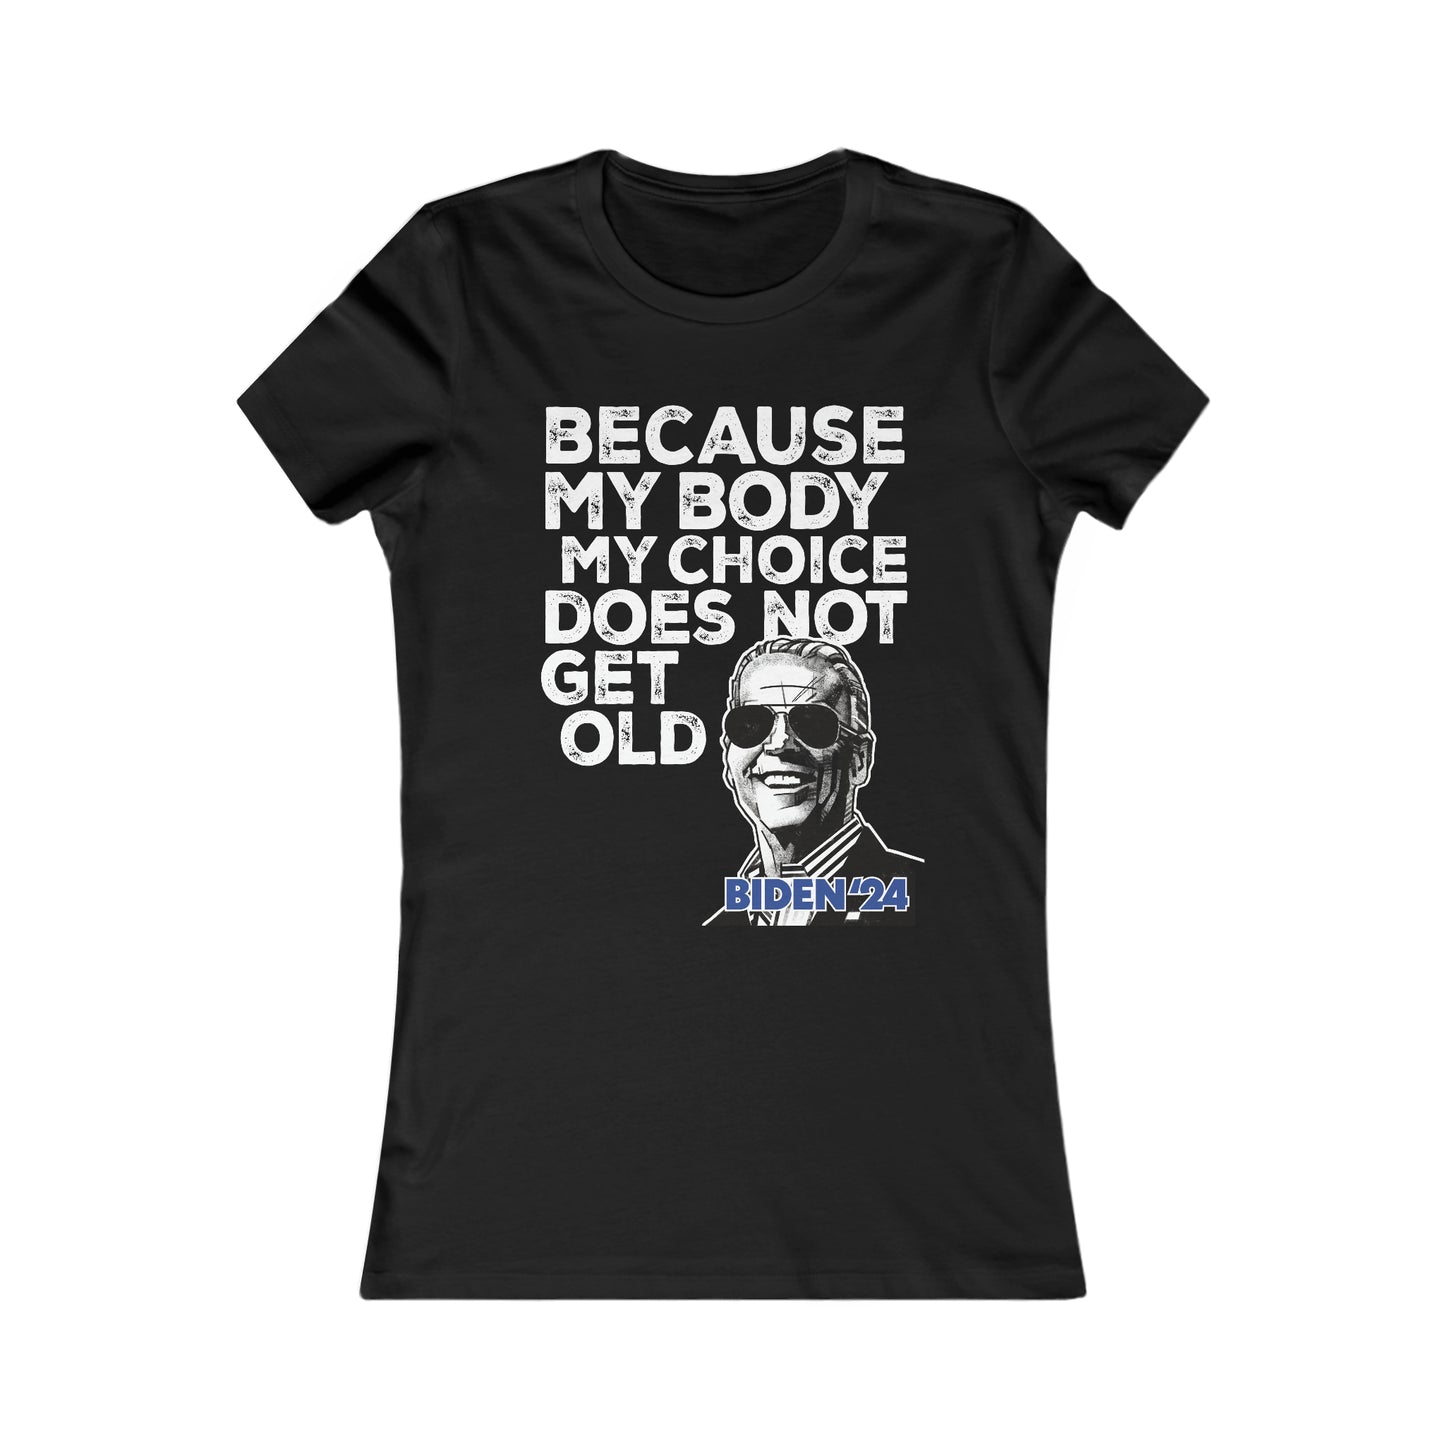 Women's Big Issue BECAUSE MY BODY MY CHOICE DOES NOT GET OLD Favorite Tee